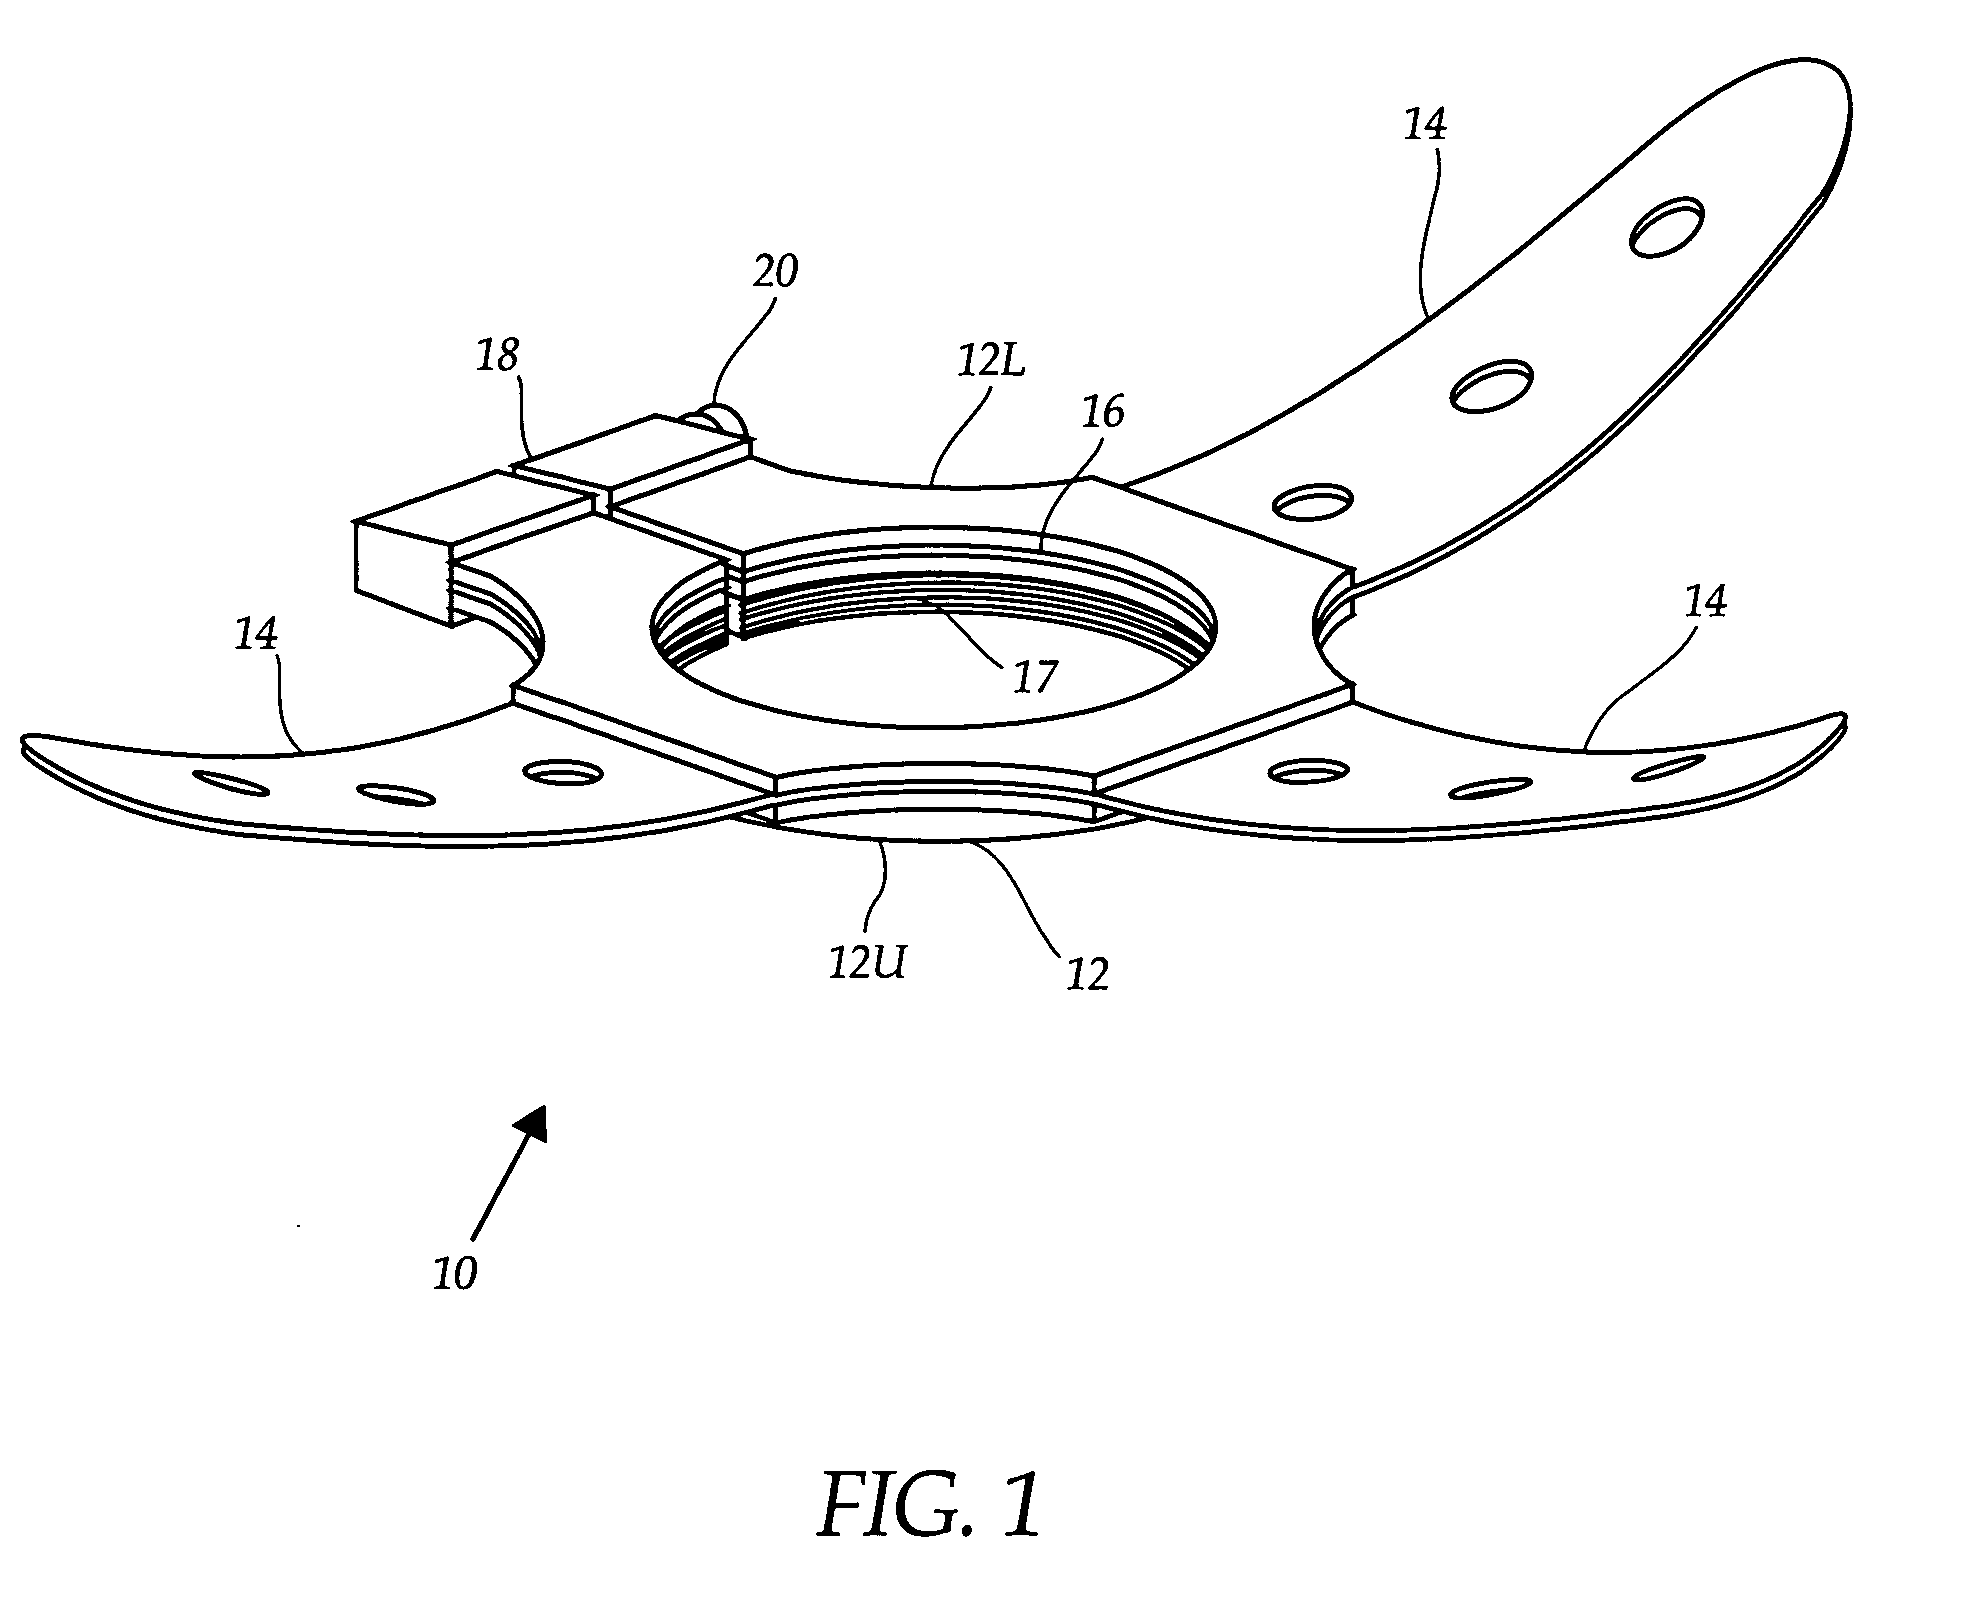 Flexible prong laminating adaptor for use in creating a laminated stump socket for attaching a prosthetic limb